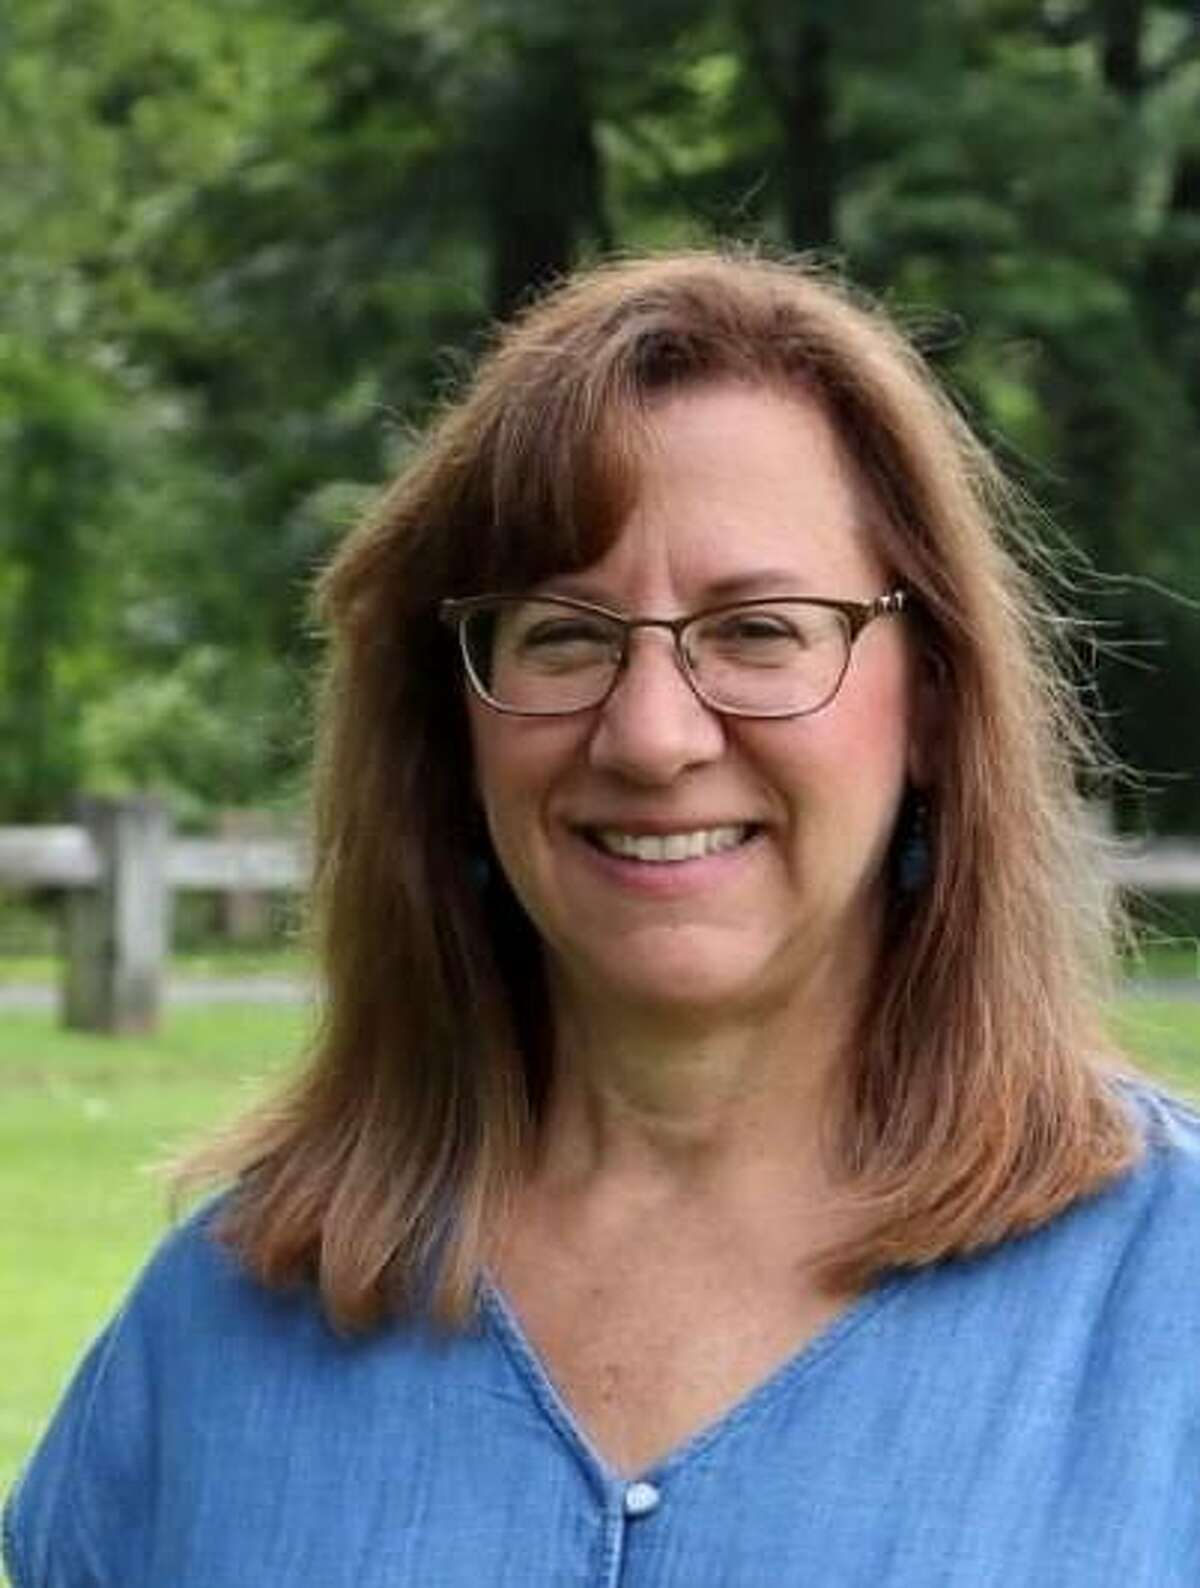 Debra Guss is a Democrat running for Middletown Board of Education.